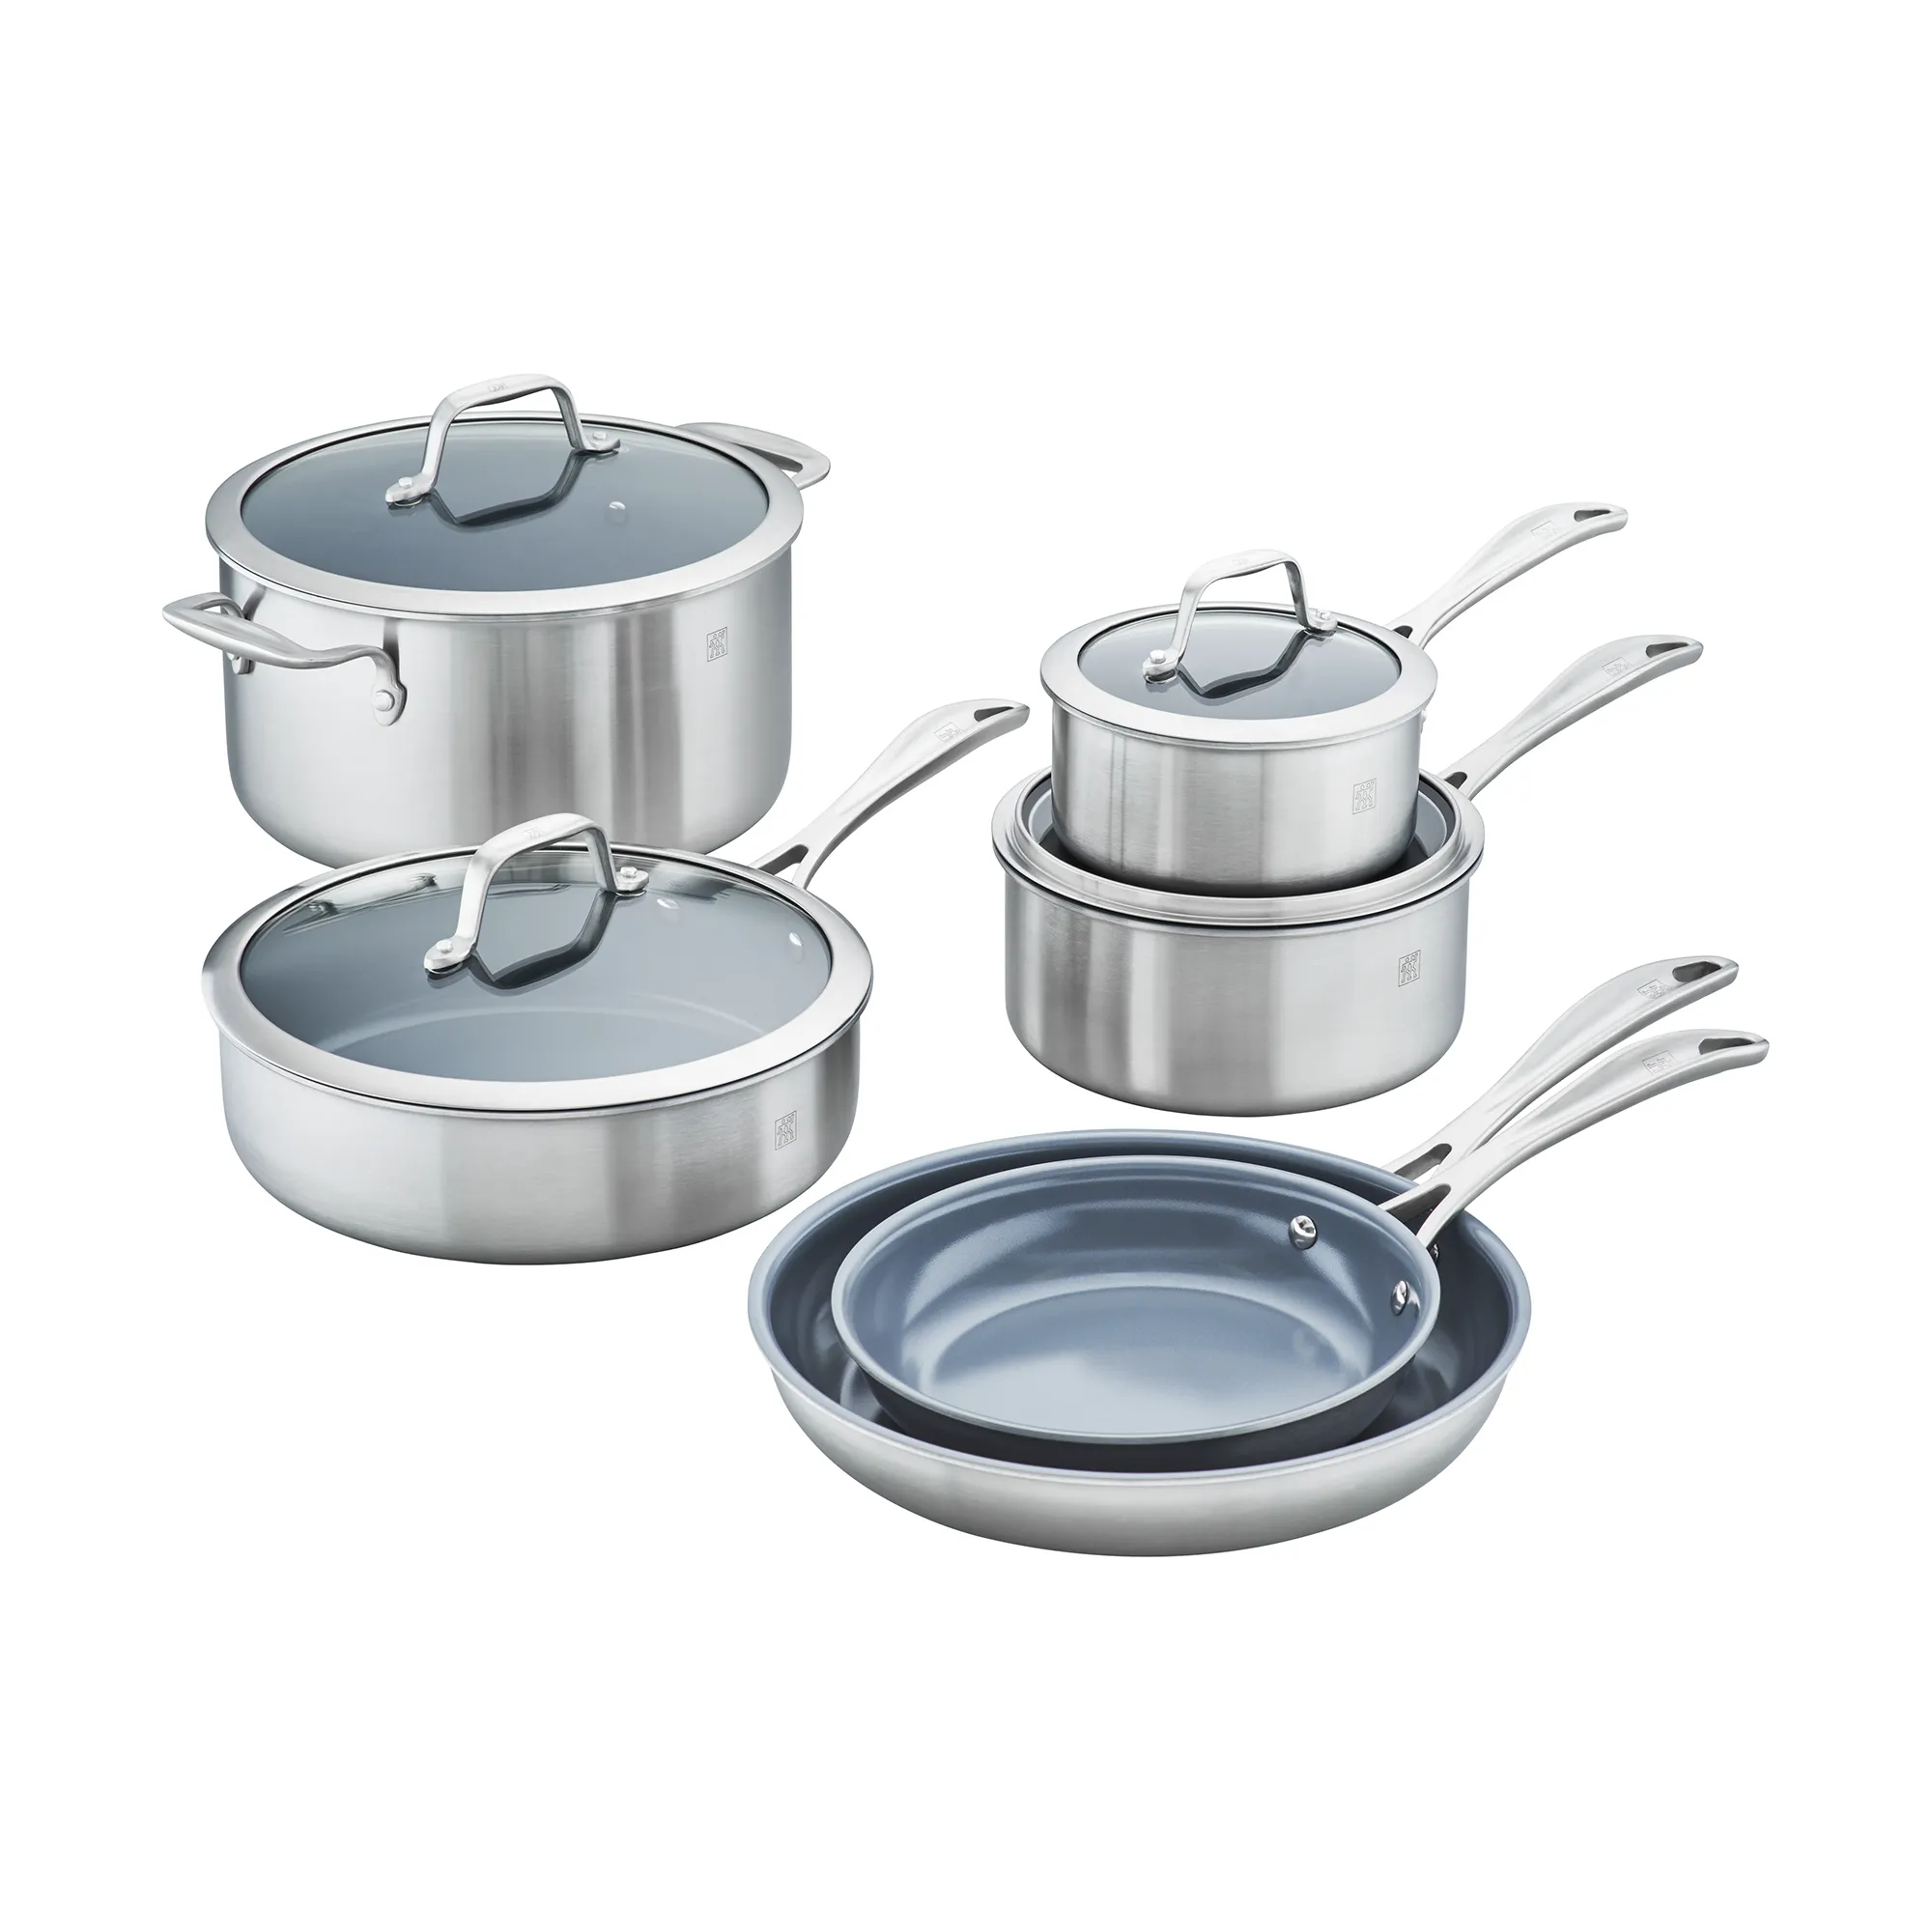 Zwilling Clad CFX 10-pc, Non-Stick, Stainless Steel Ceramic Cookware Set